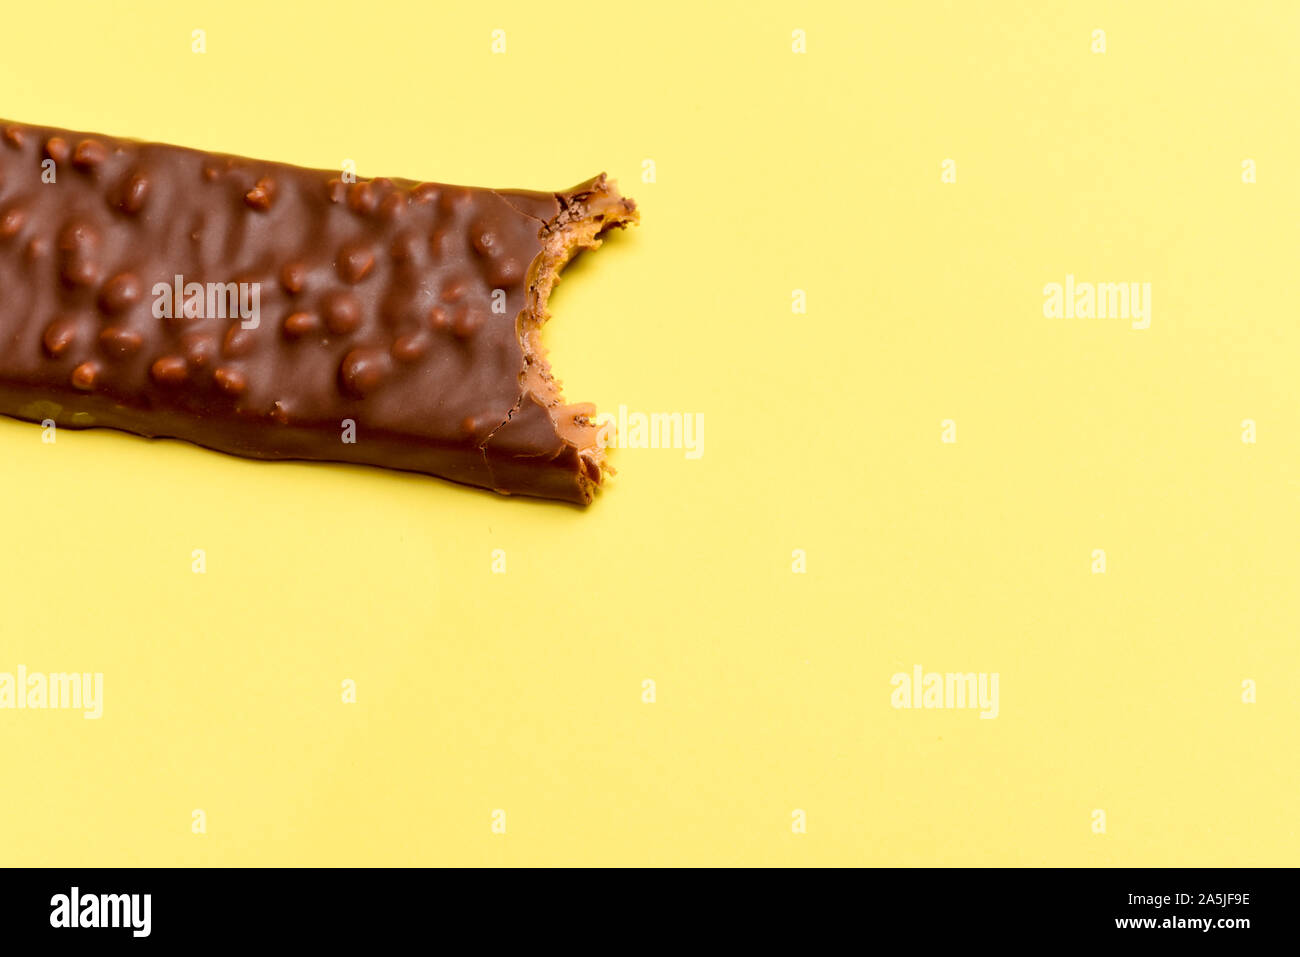 Tasty chocolate bar with a bite taken out isolated High calorie snack food Stock Photo